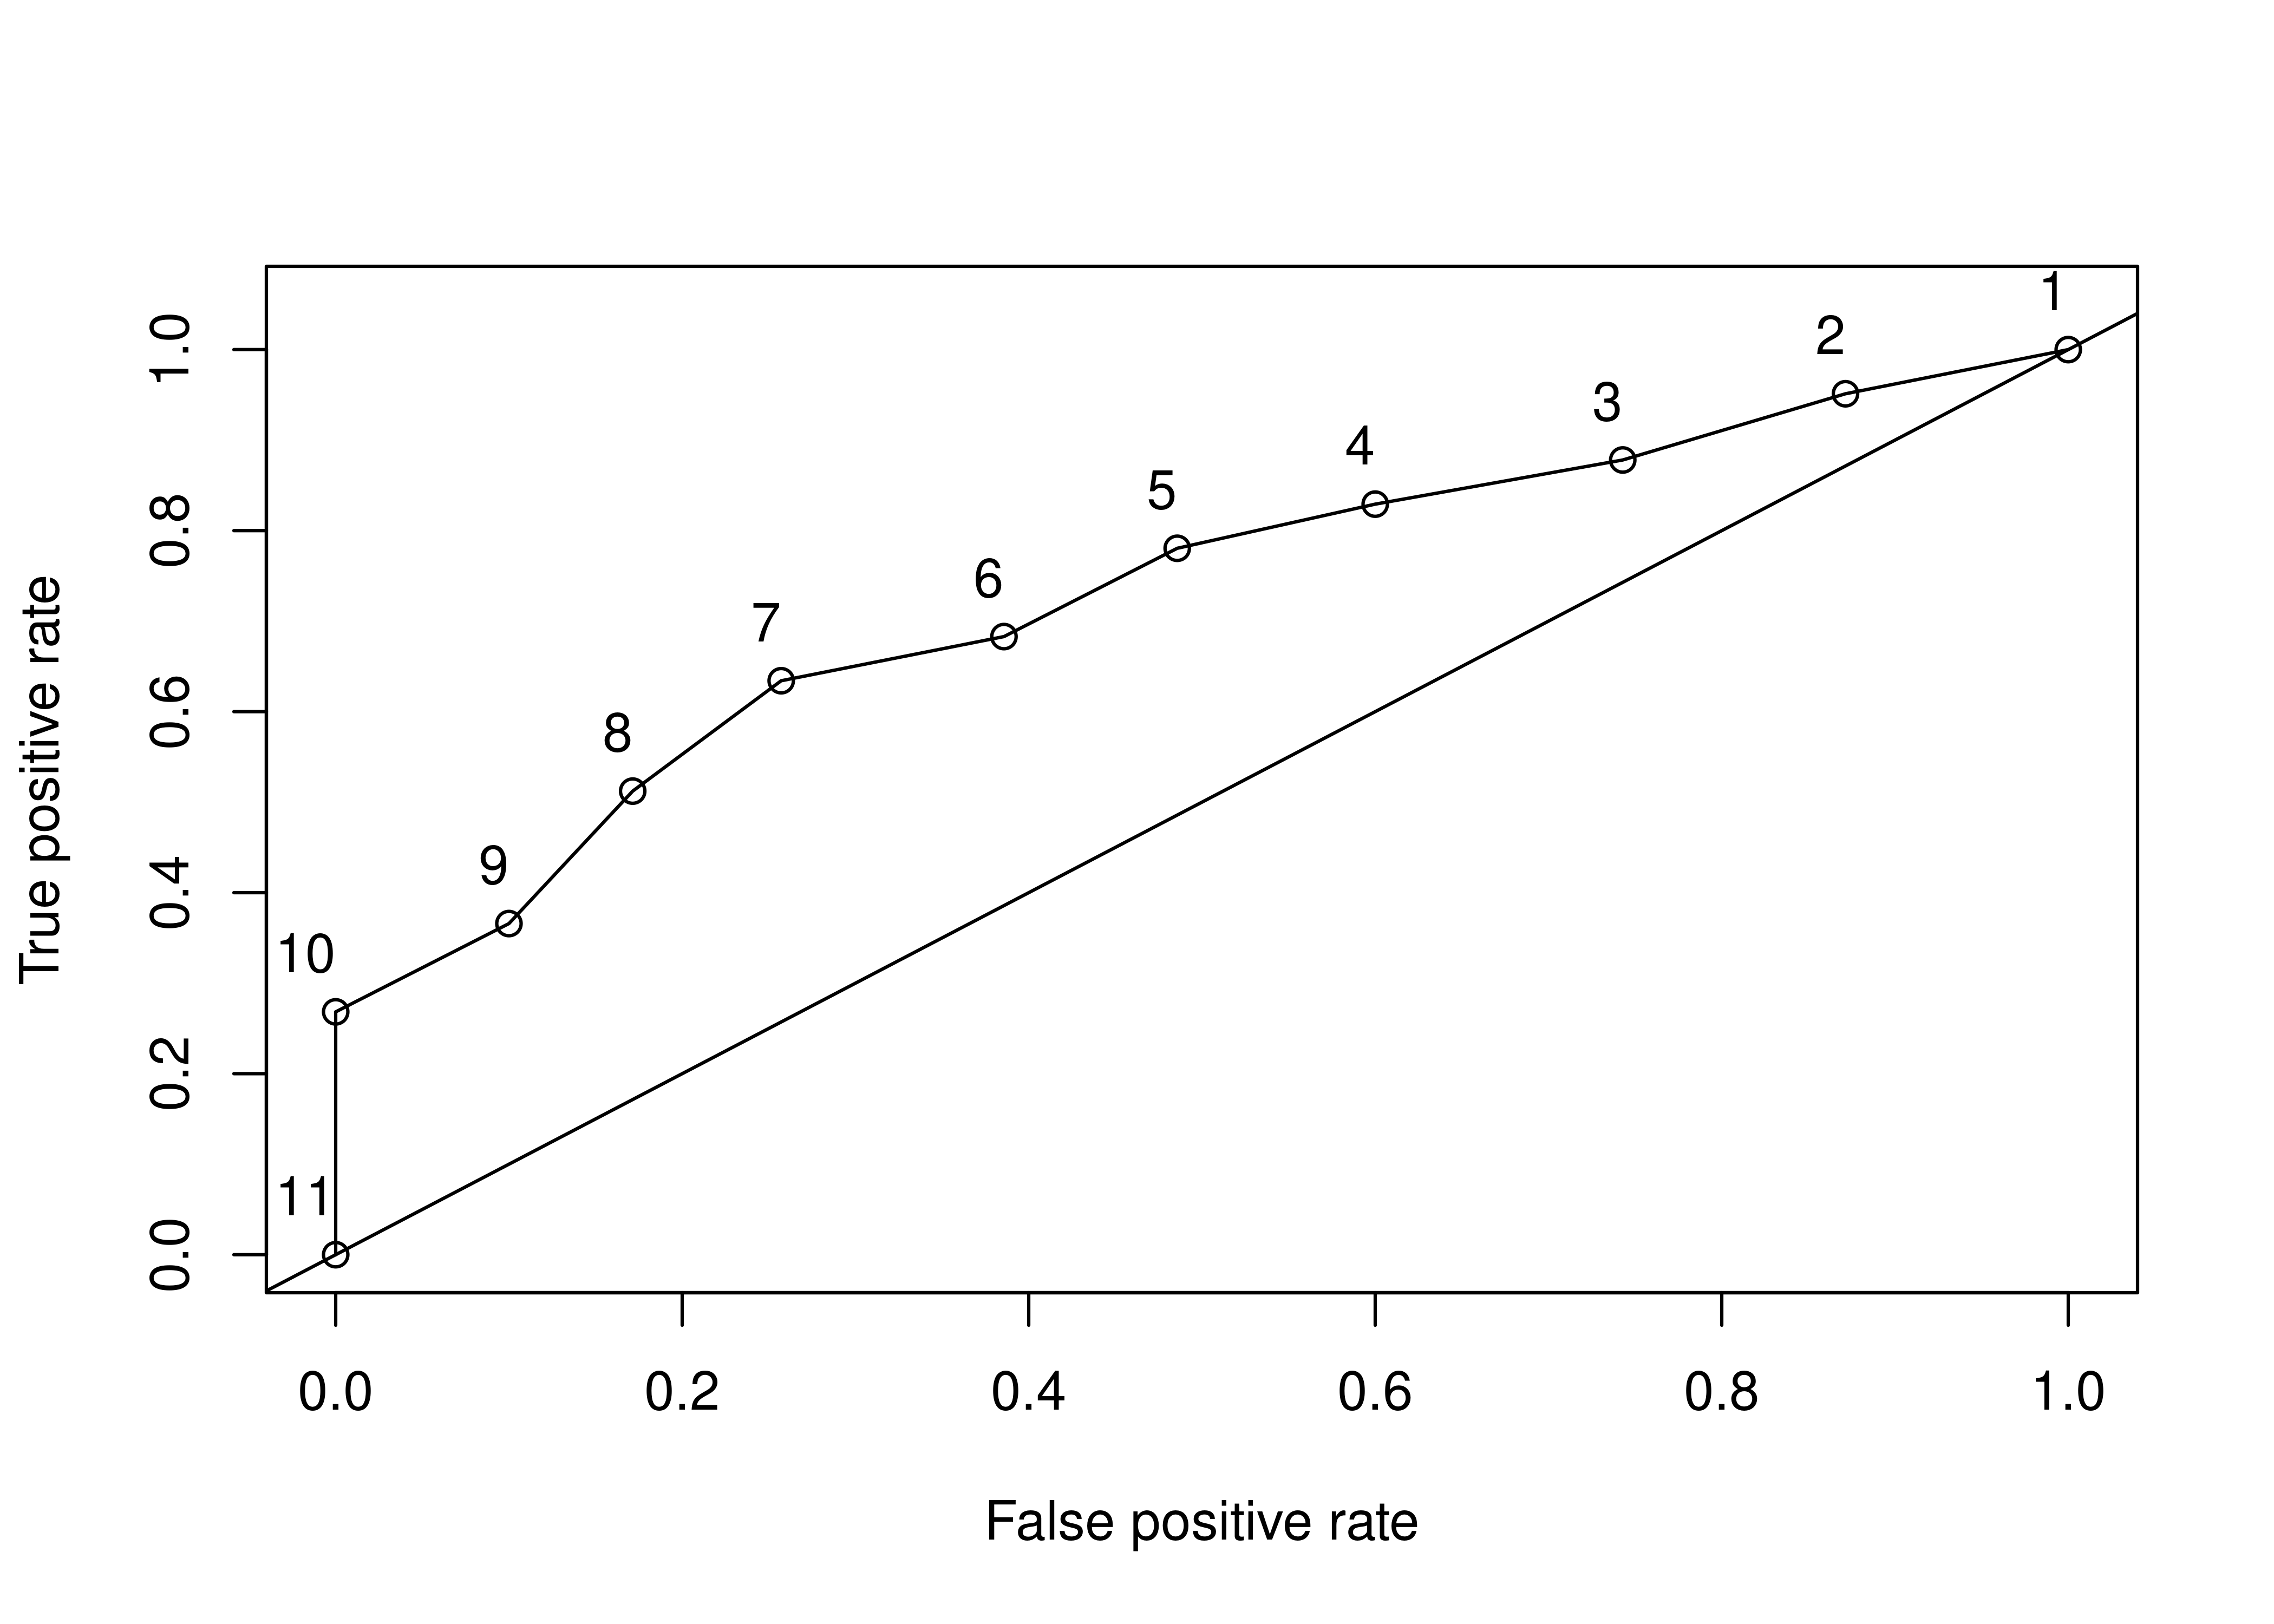 Empirical Receiver Operating Characteristic Curve With Cutoffs Overlaid.